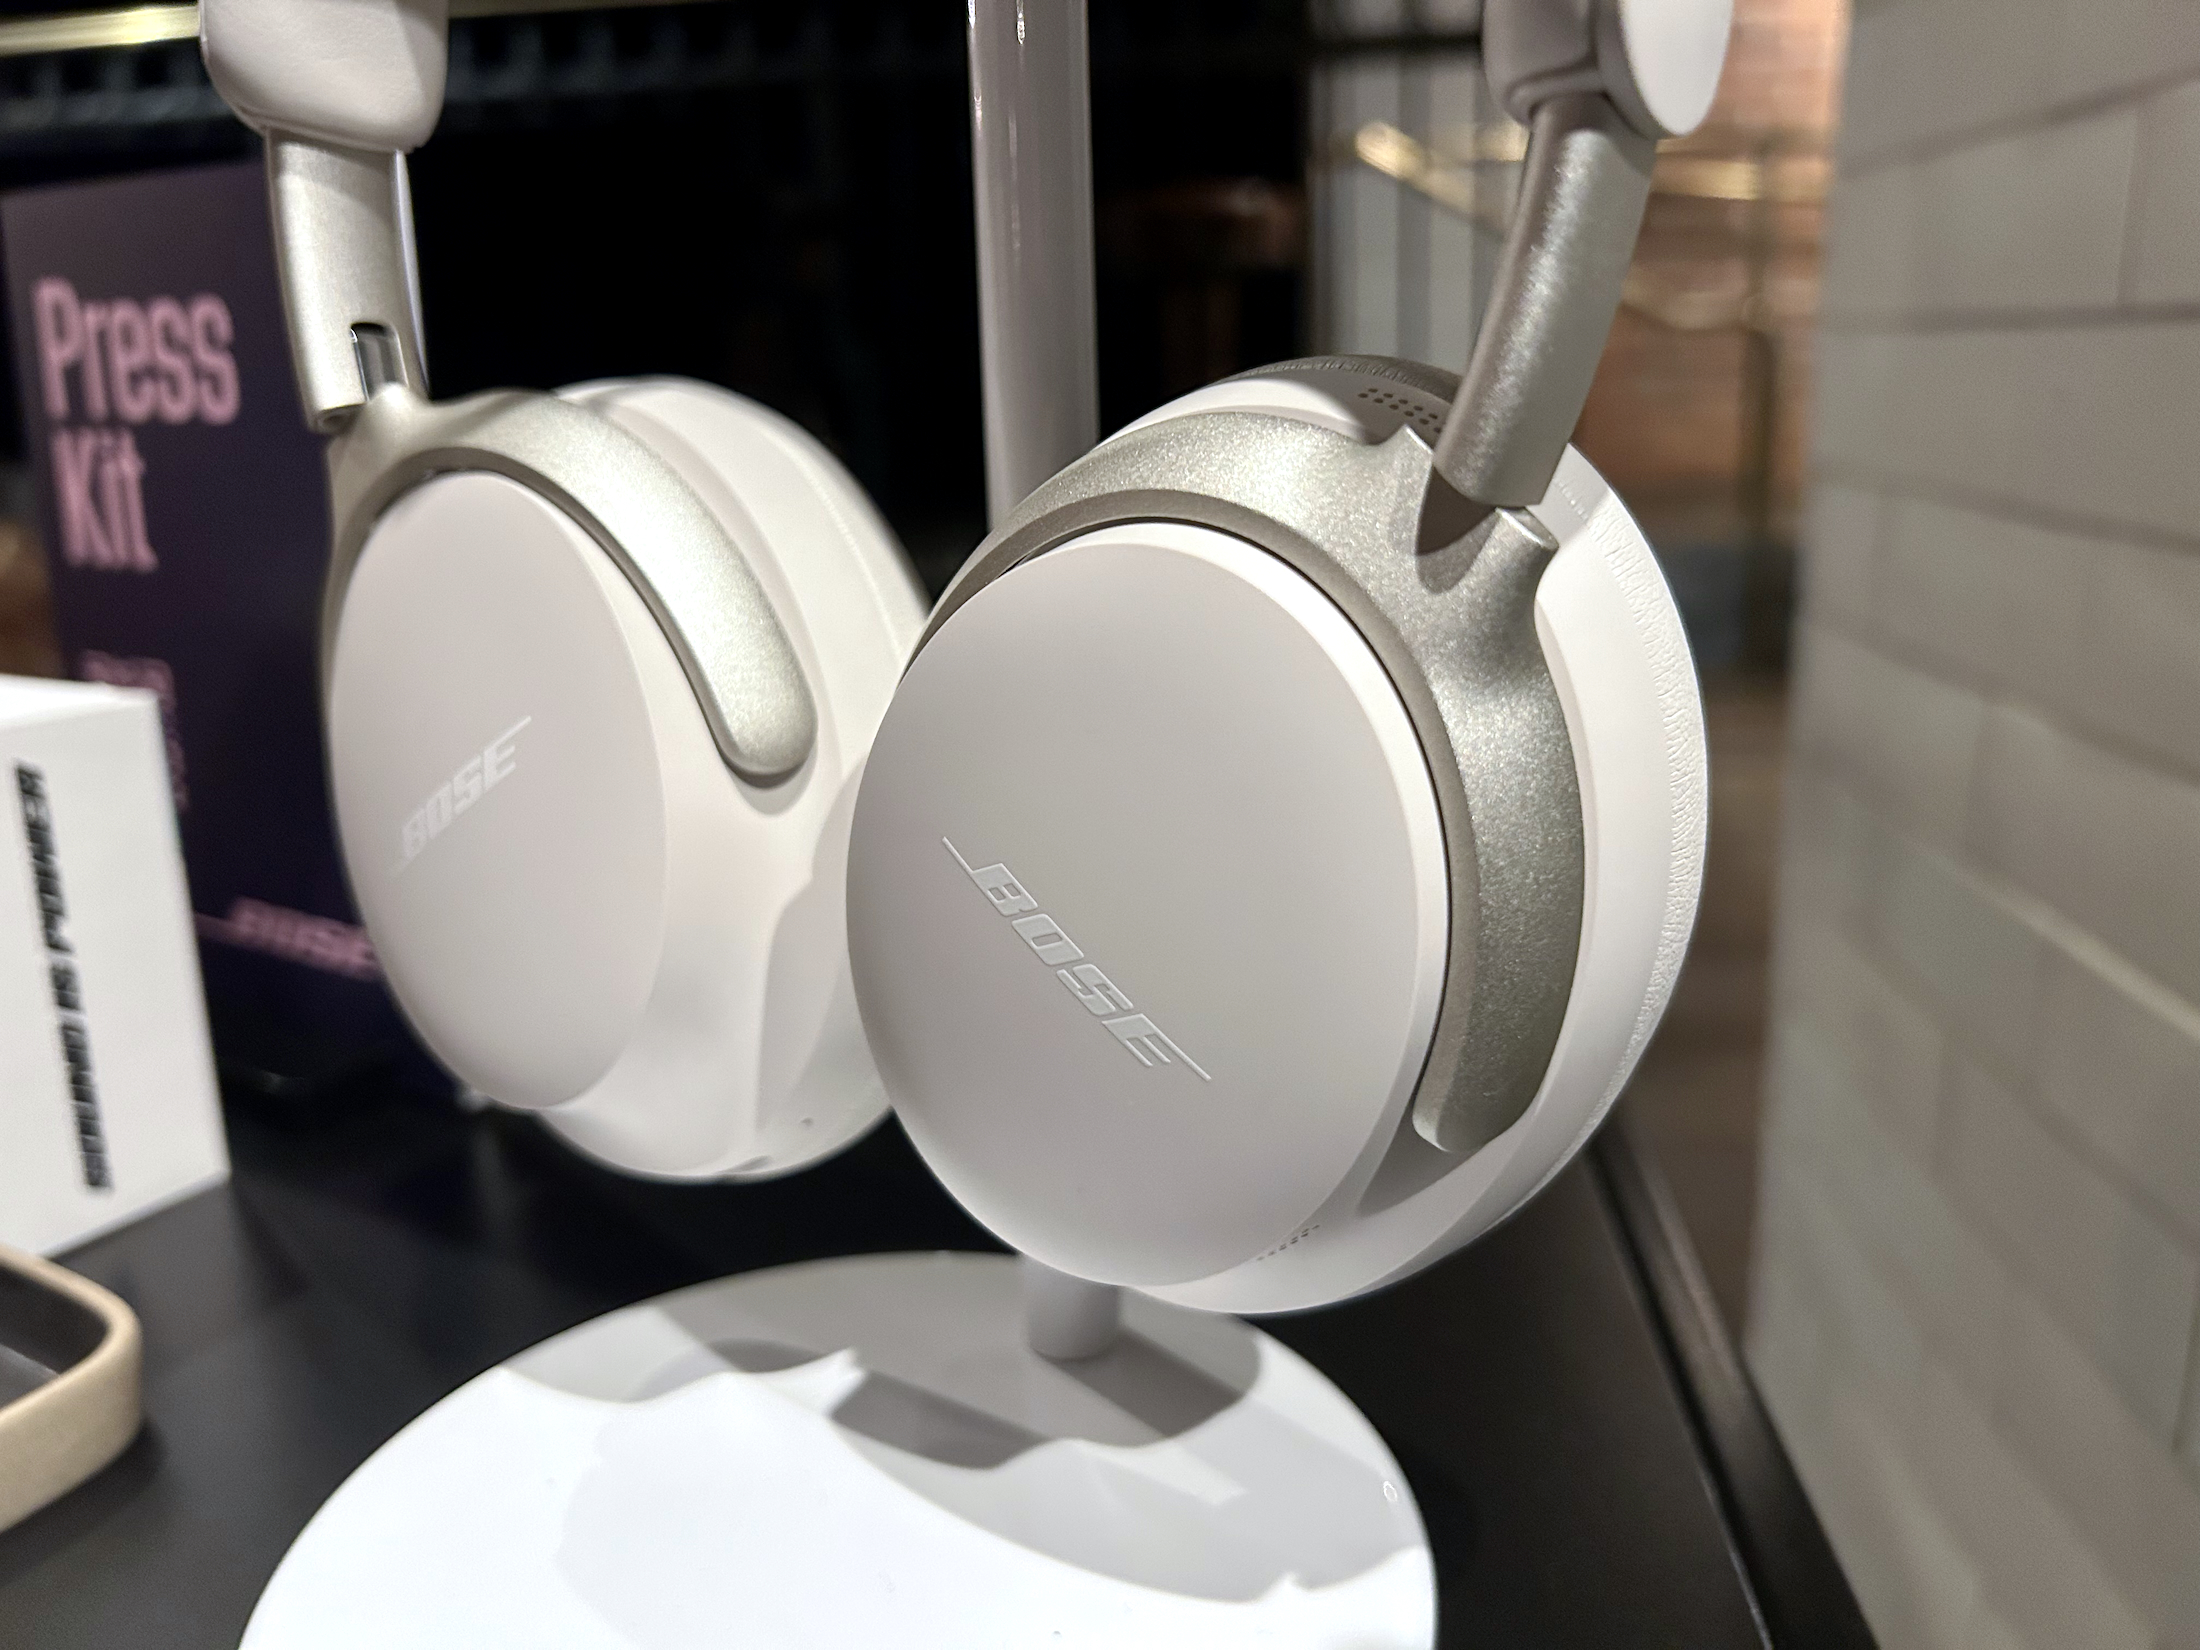 Bose's new Ultra headphones and earbuds get spatial audio